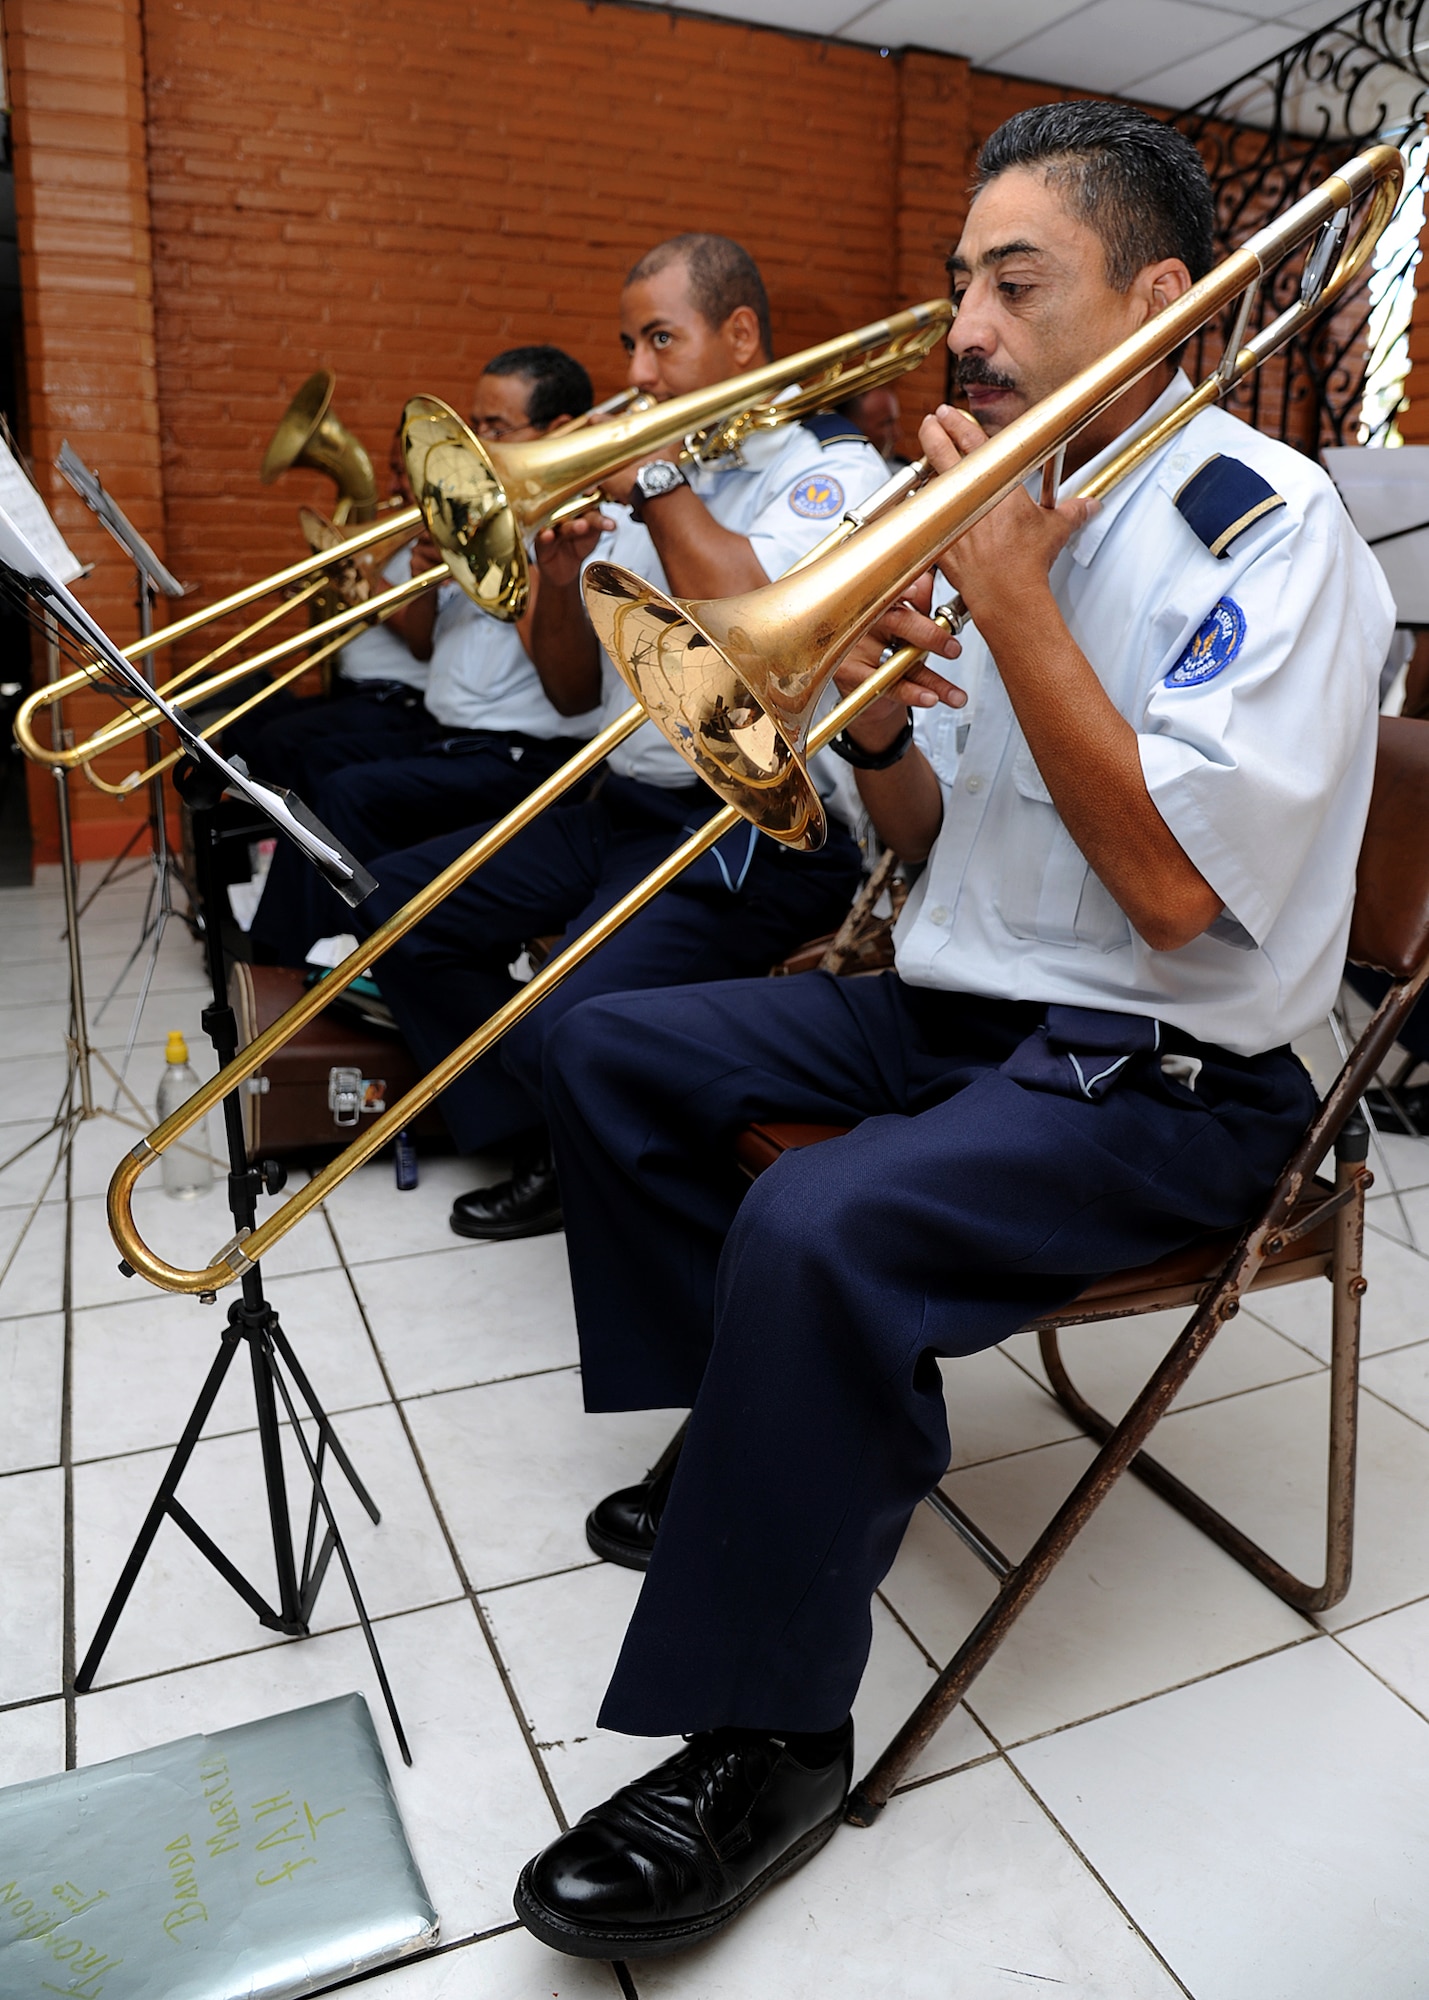 The Honduran air force band provided music before and after the closing ceremony, as well as the national anthem for both the United States and Honduras in Tegucigalpa, Honduras, Feb. 23.  (U.S. Air Force photo by Tech. Sgt. Lesley Waters)